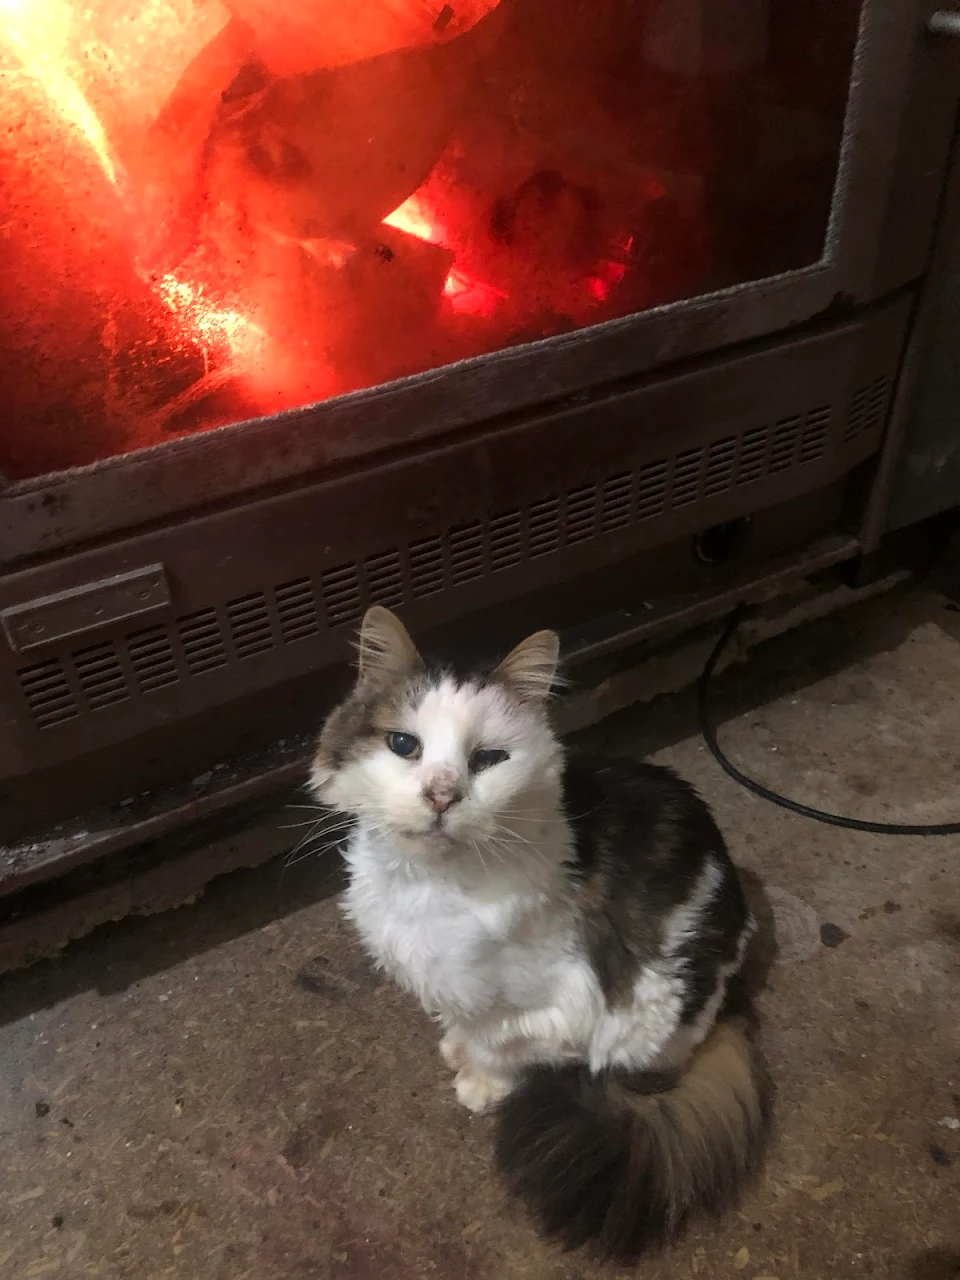 She’s 14, has terminal cancer, and just discovered the fireplace. I think her final months will be the best she’s ever had.